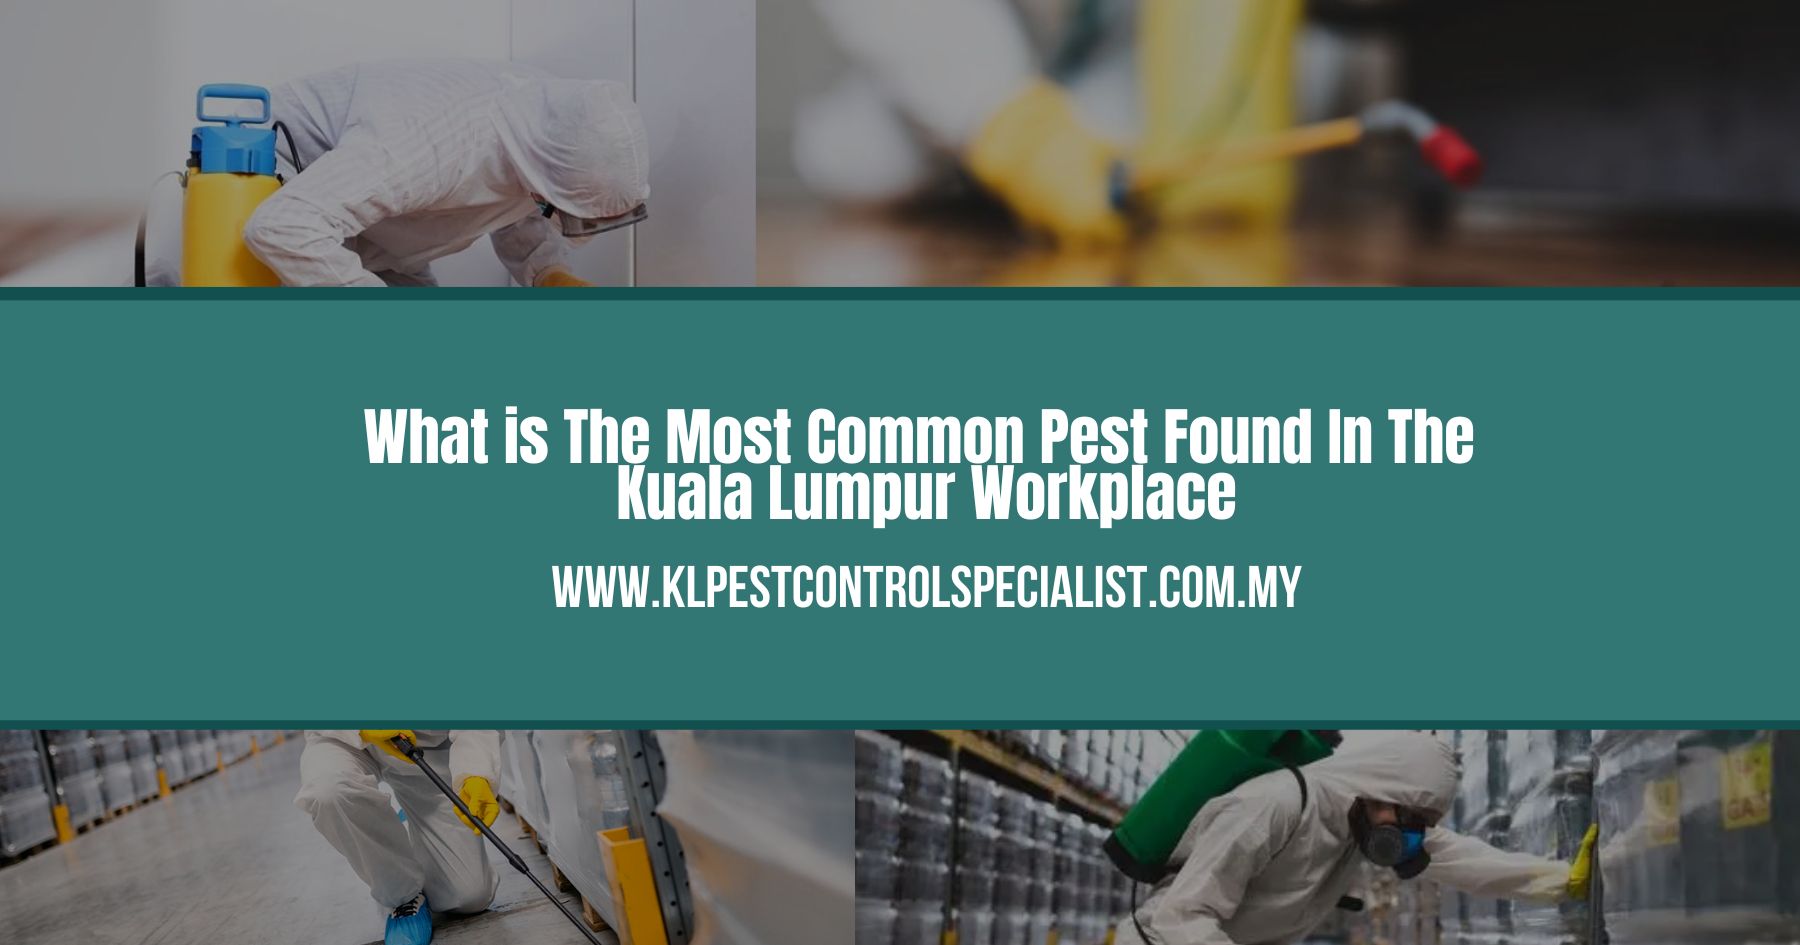 What is The Most Common Pest Found In The Kuala Lumpur Workplace